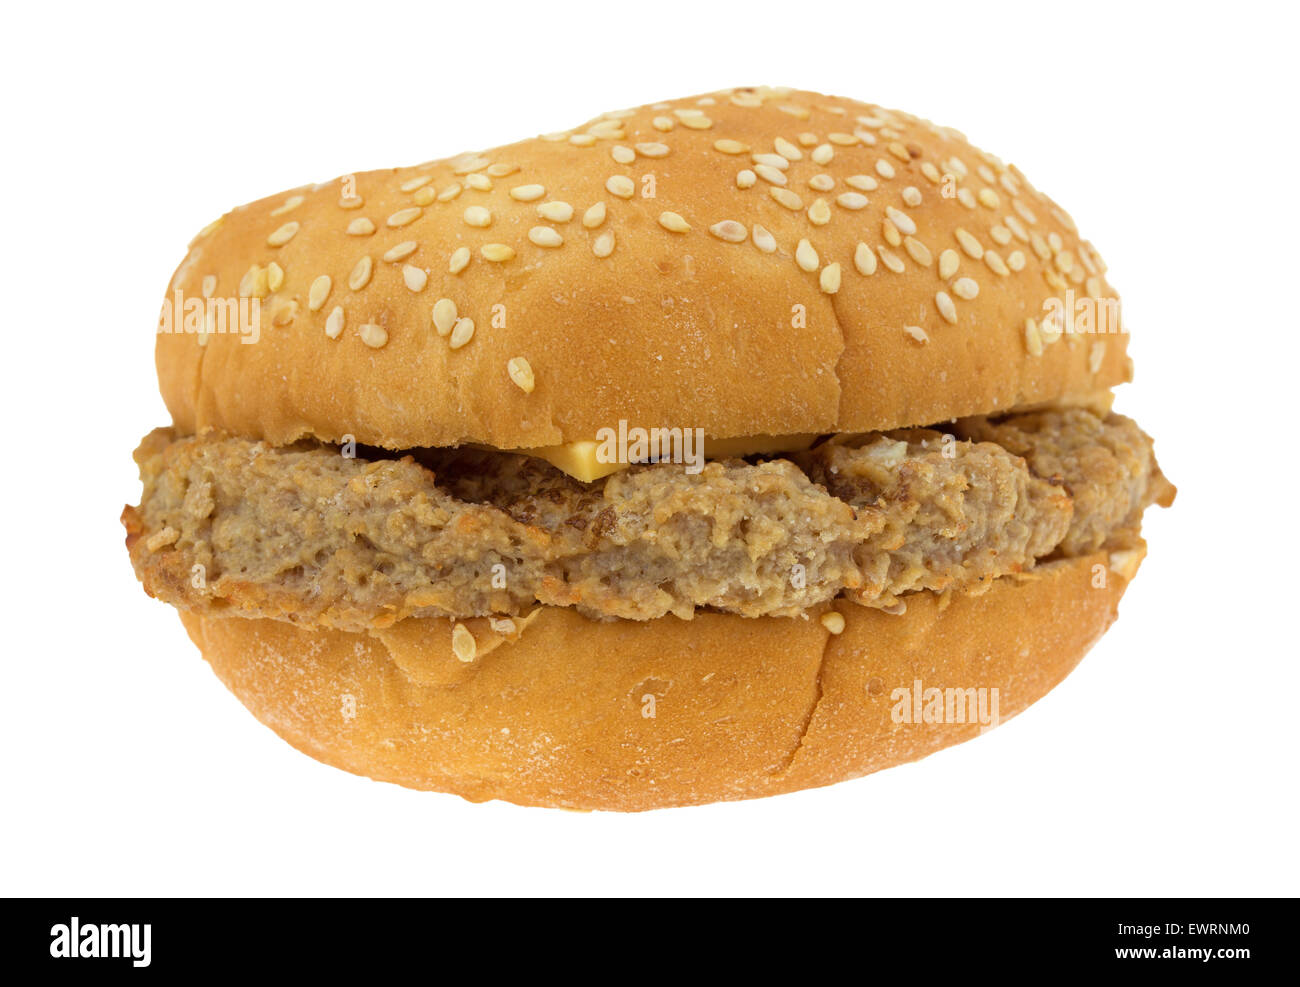 A microwaved cheeseburger with a sesame seed bun isolated on a white background. Stock Photo